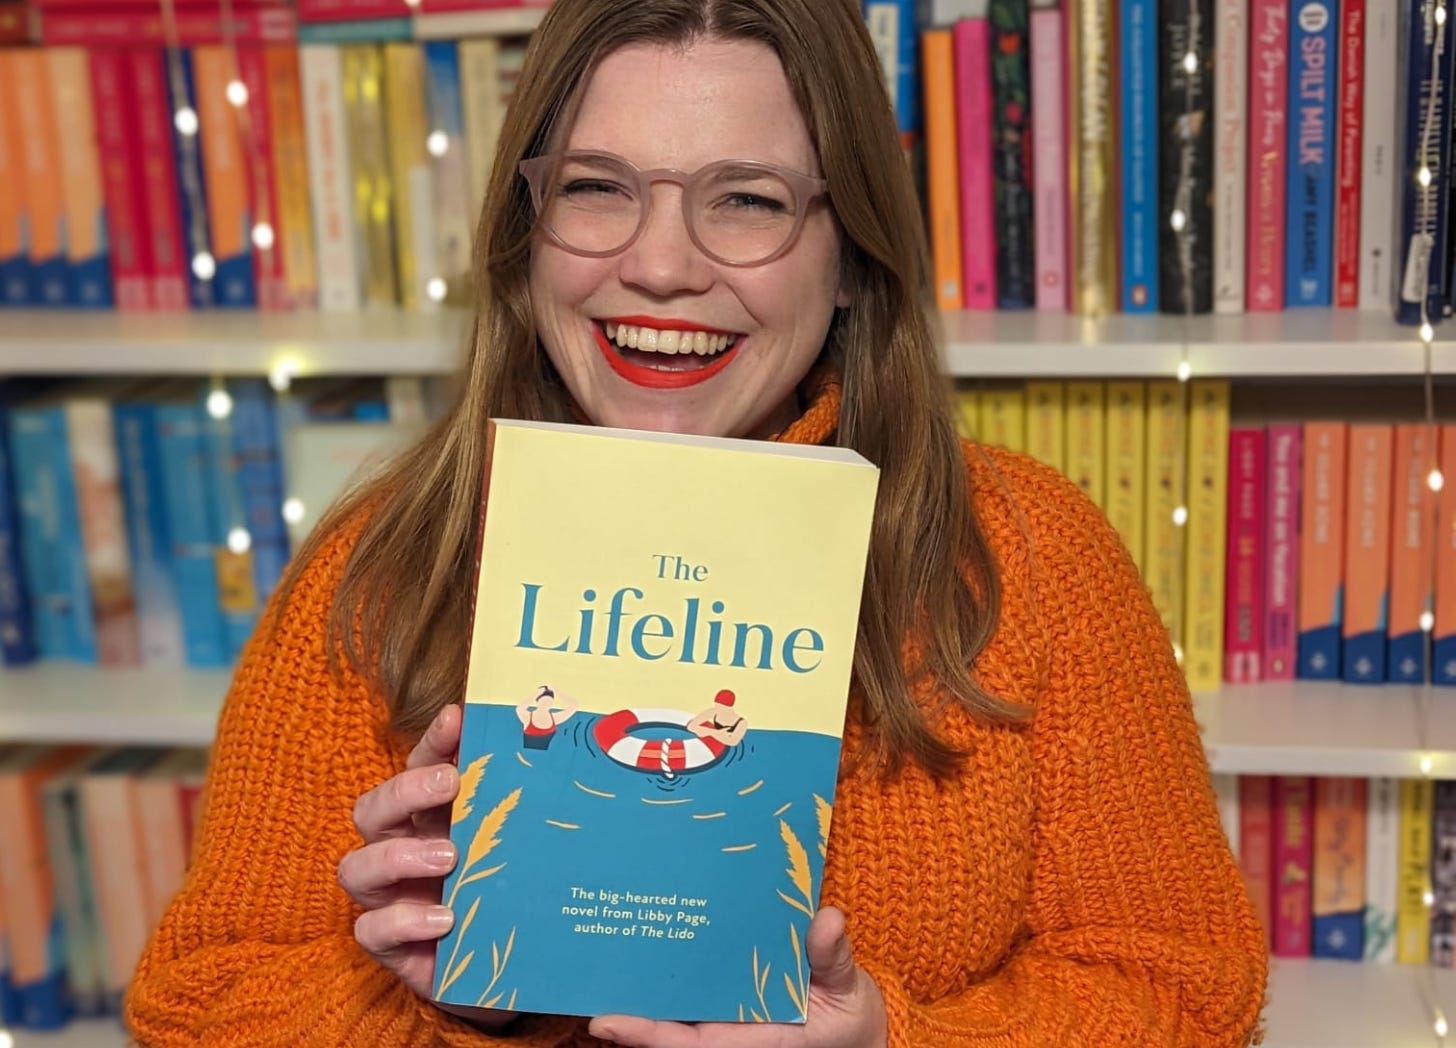 Author Libby Page is wearing an orange jumper and smiling while holding a copy of her book, The Lifeline. There are bookshelves in the background.